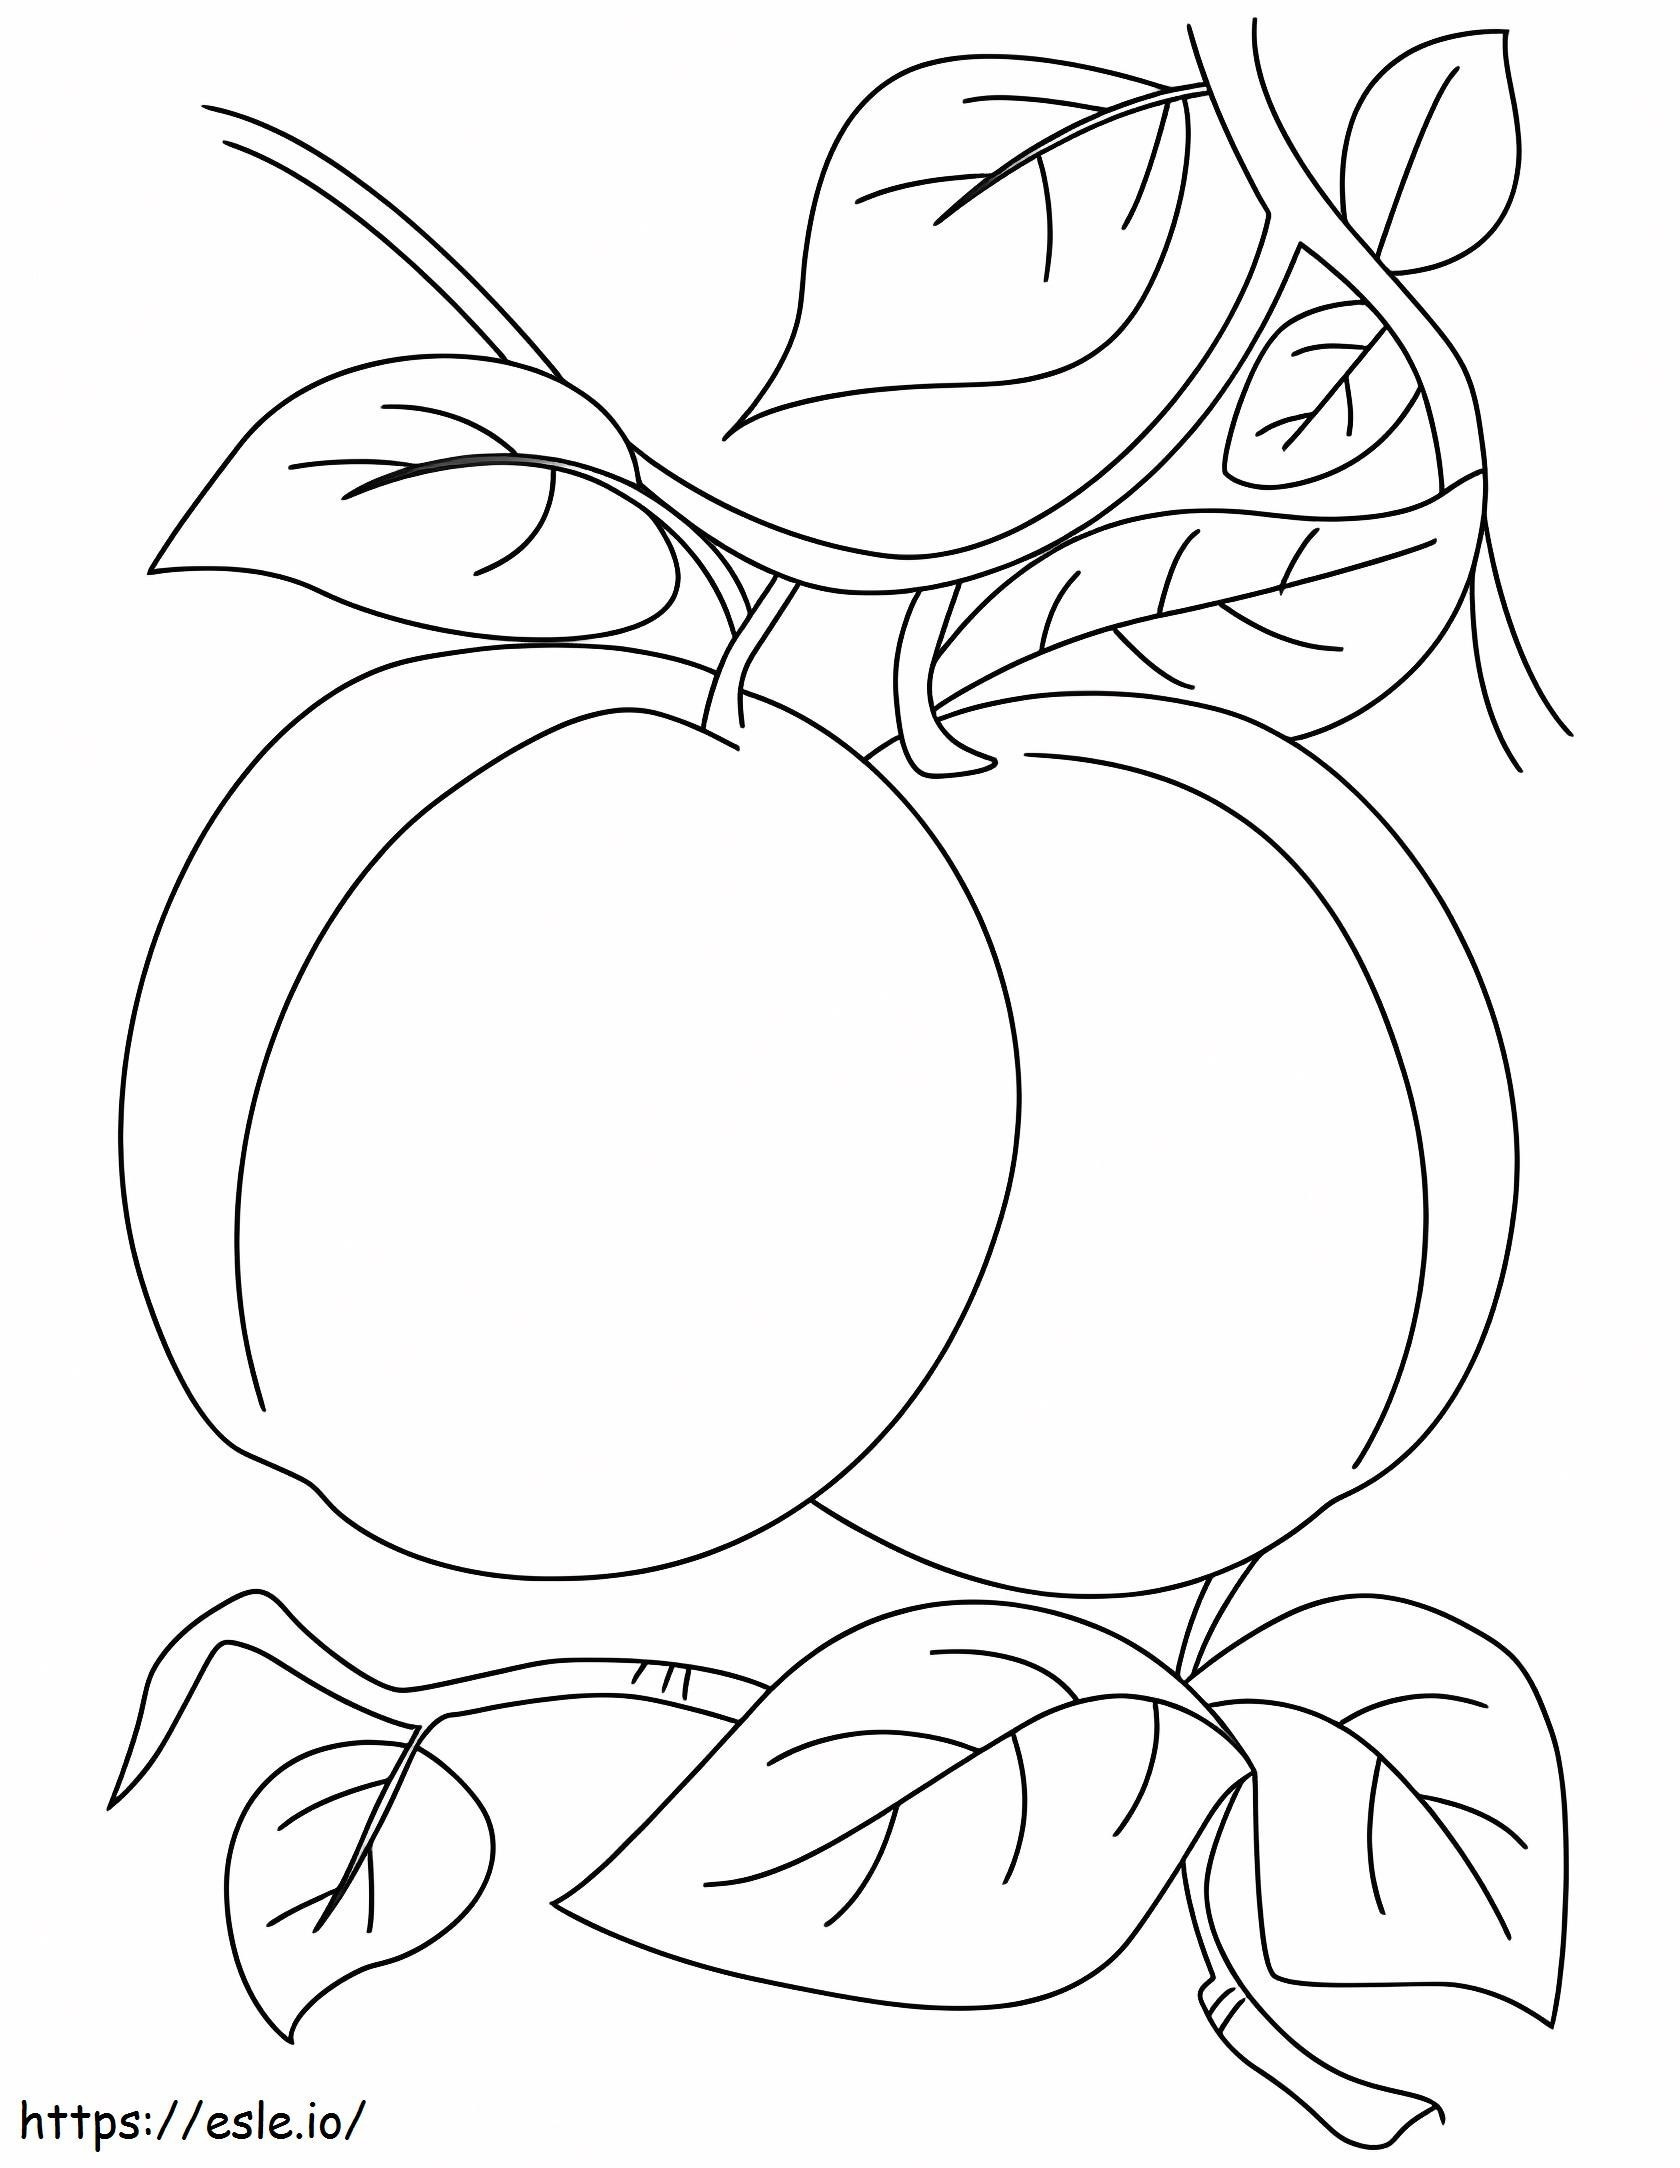 Apricot 10 coloring page